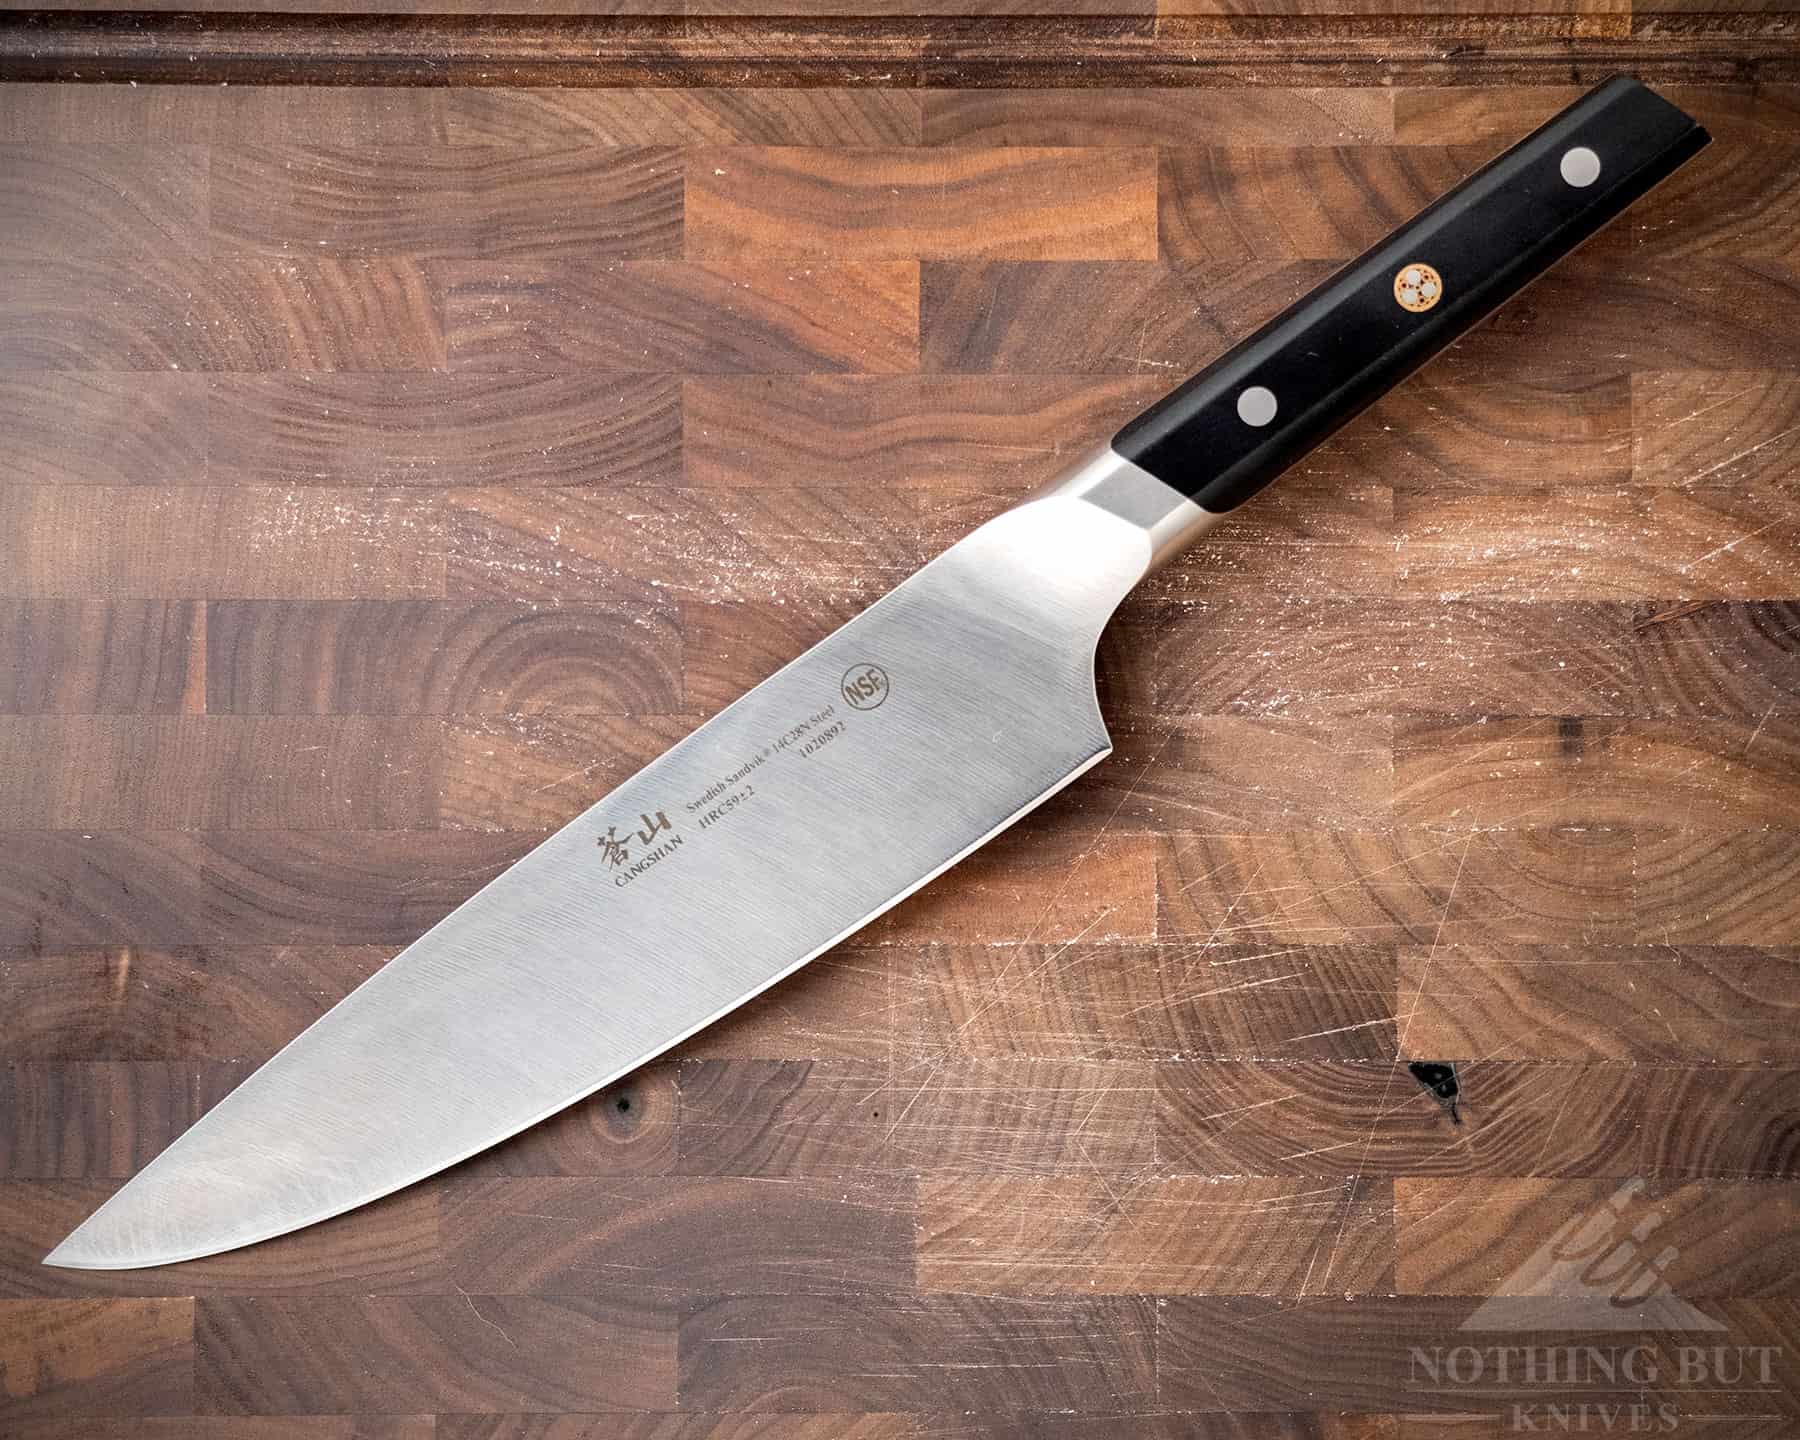 Cangshan Z Series Chef's Knife Review - Very strange knife. Not too bad  